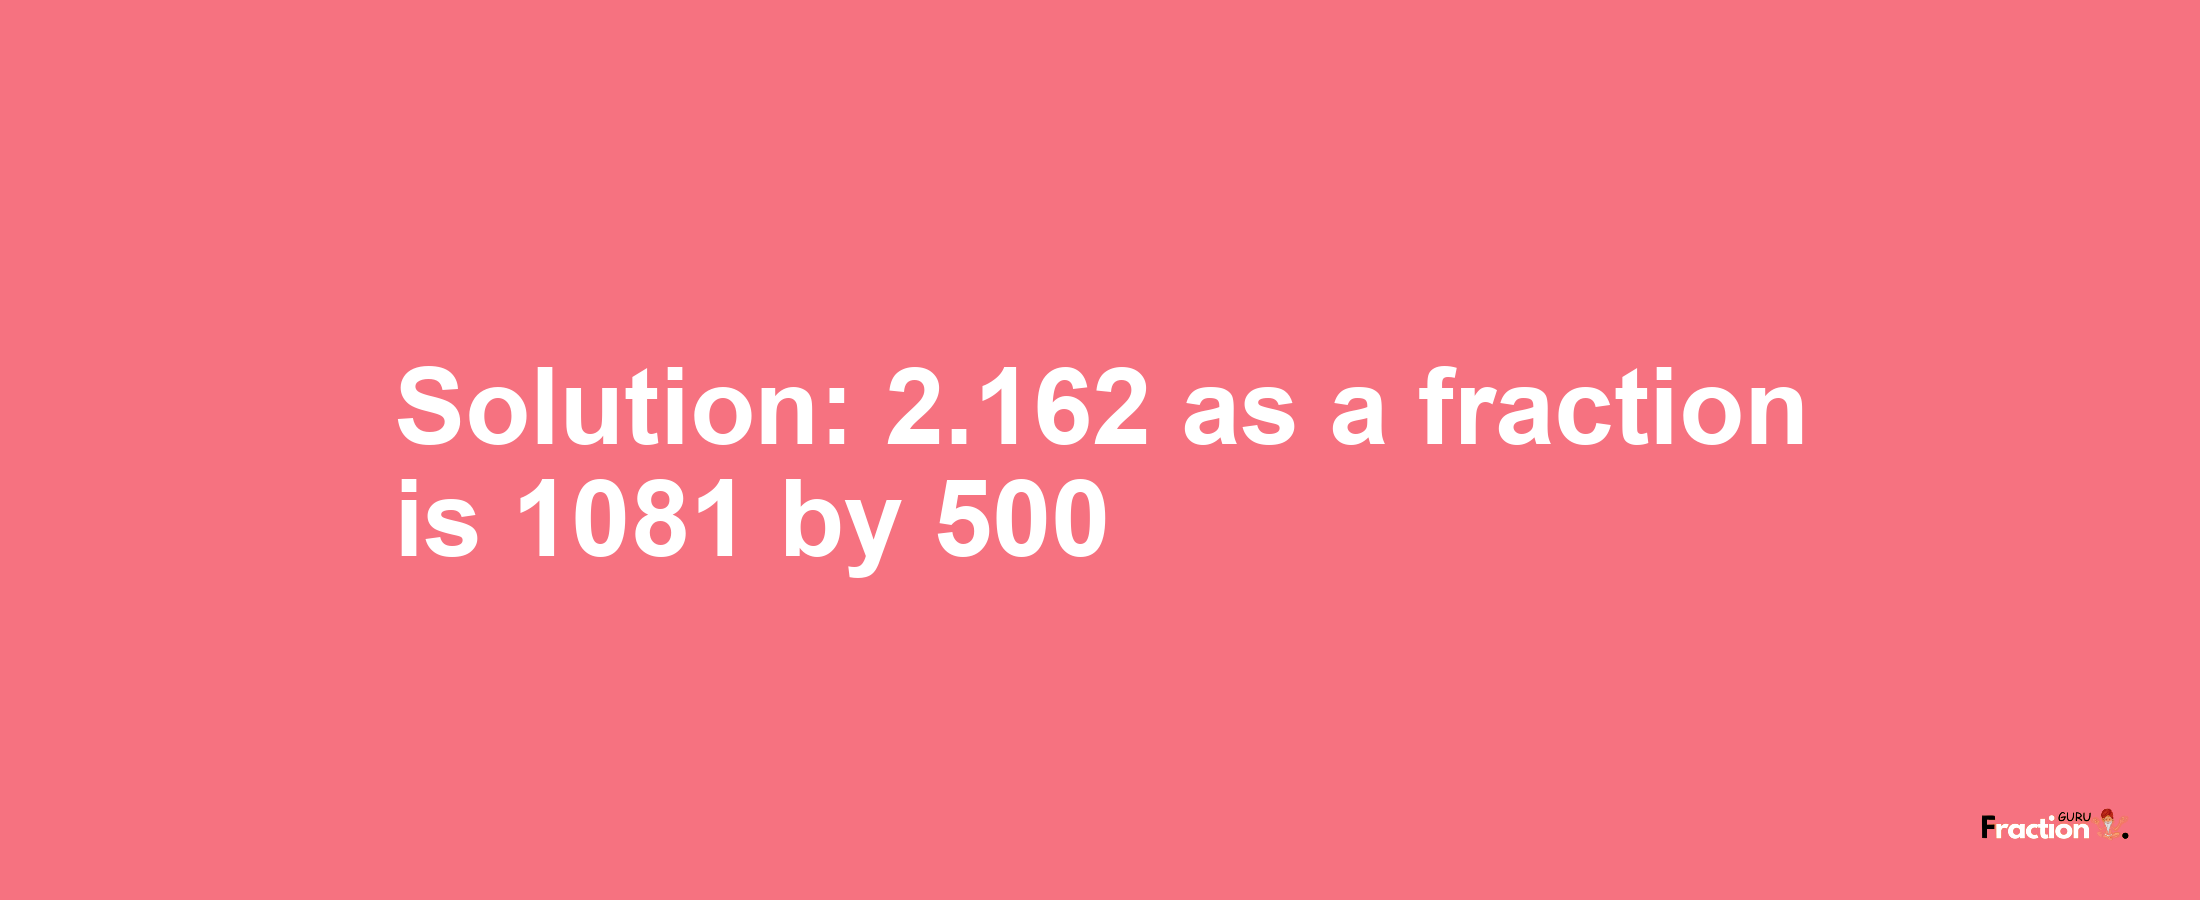 Solution:2.162 as a fraction is 1081/500